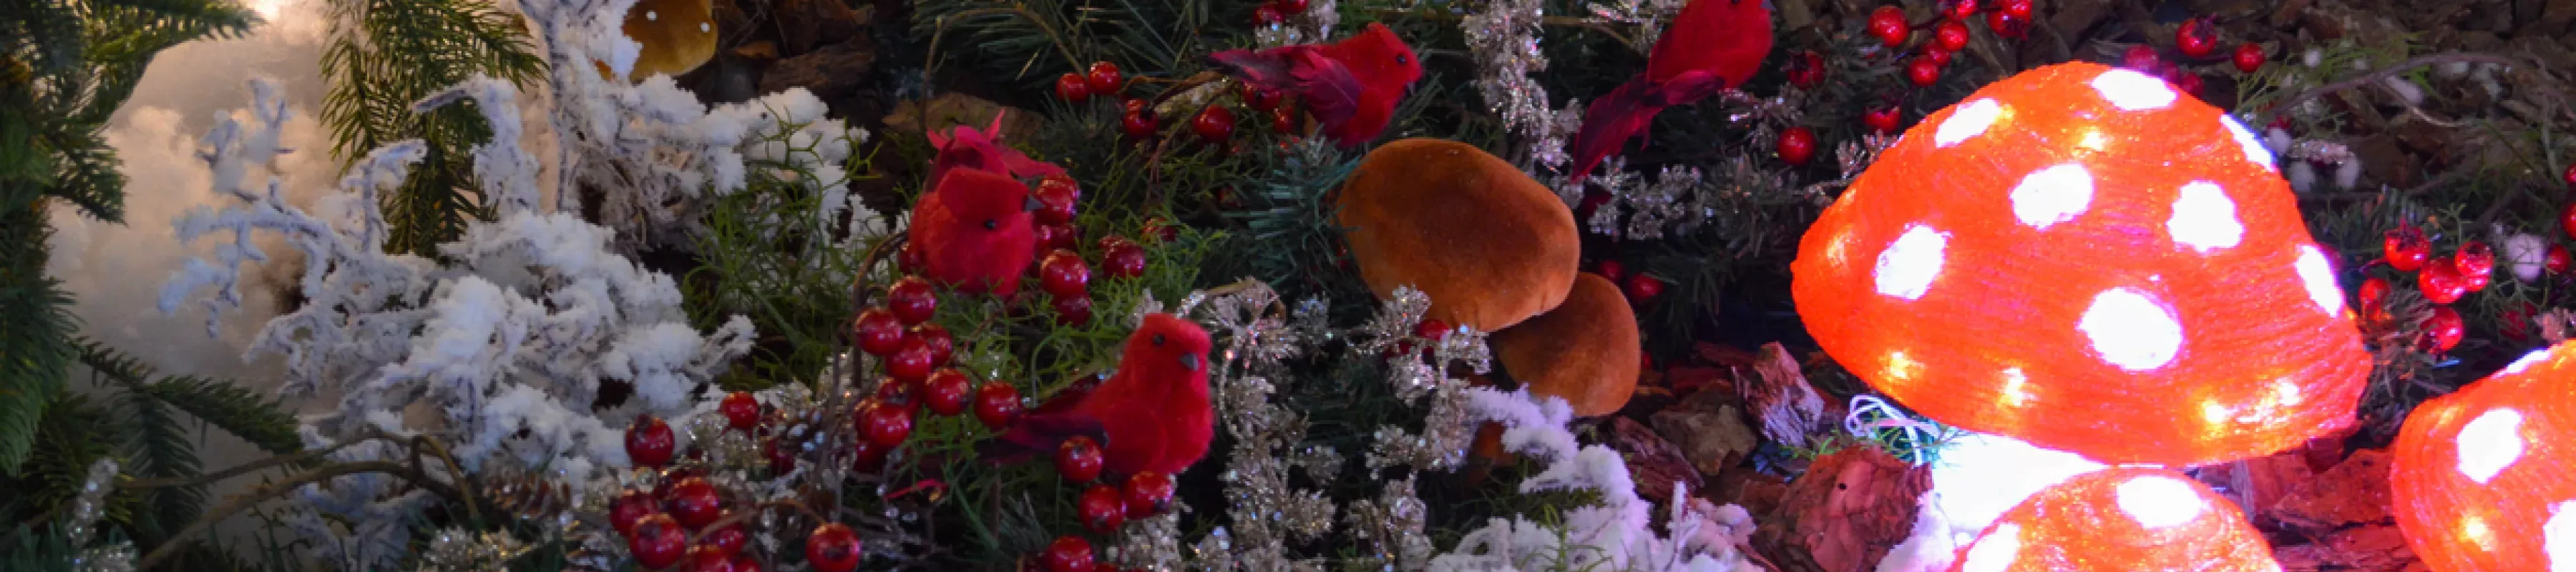 glowing red and white mushrooms under foliage decorations